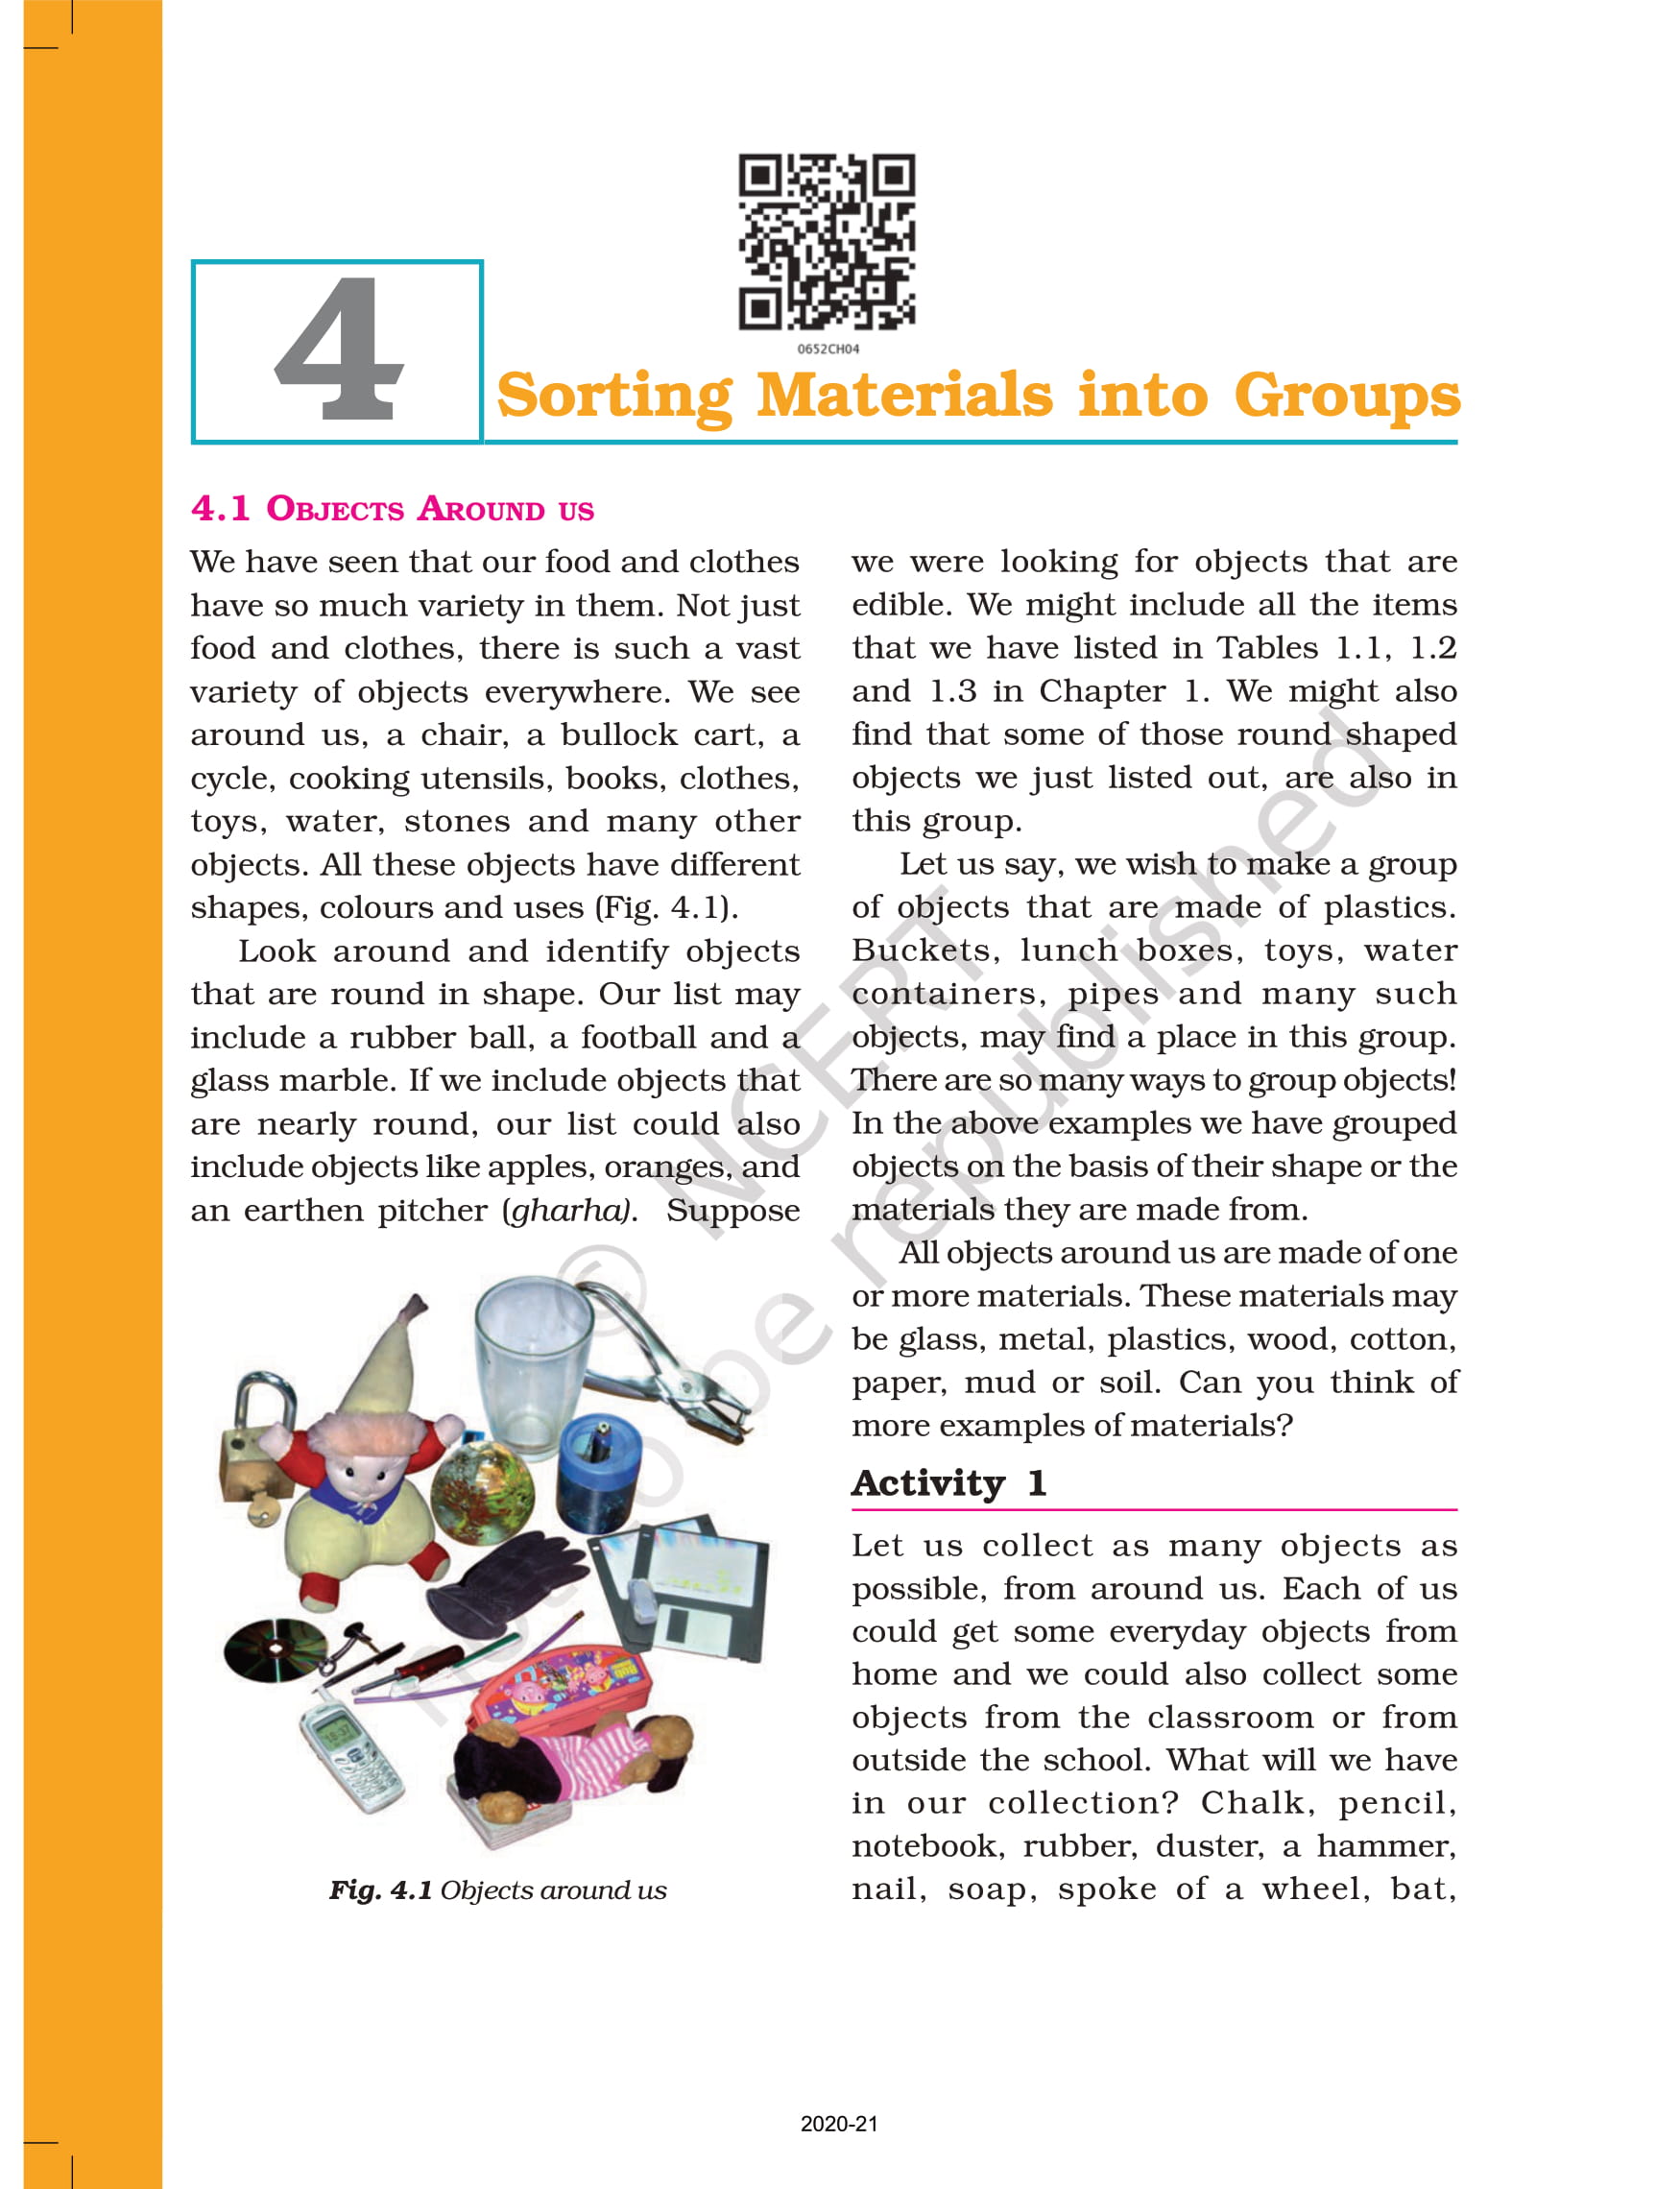 ncert-book-chapter-pdf-of-class-6-science-sorting-materials-into-groups-chapter-4